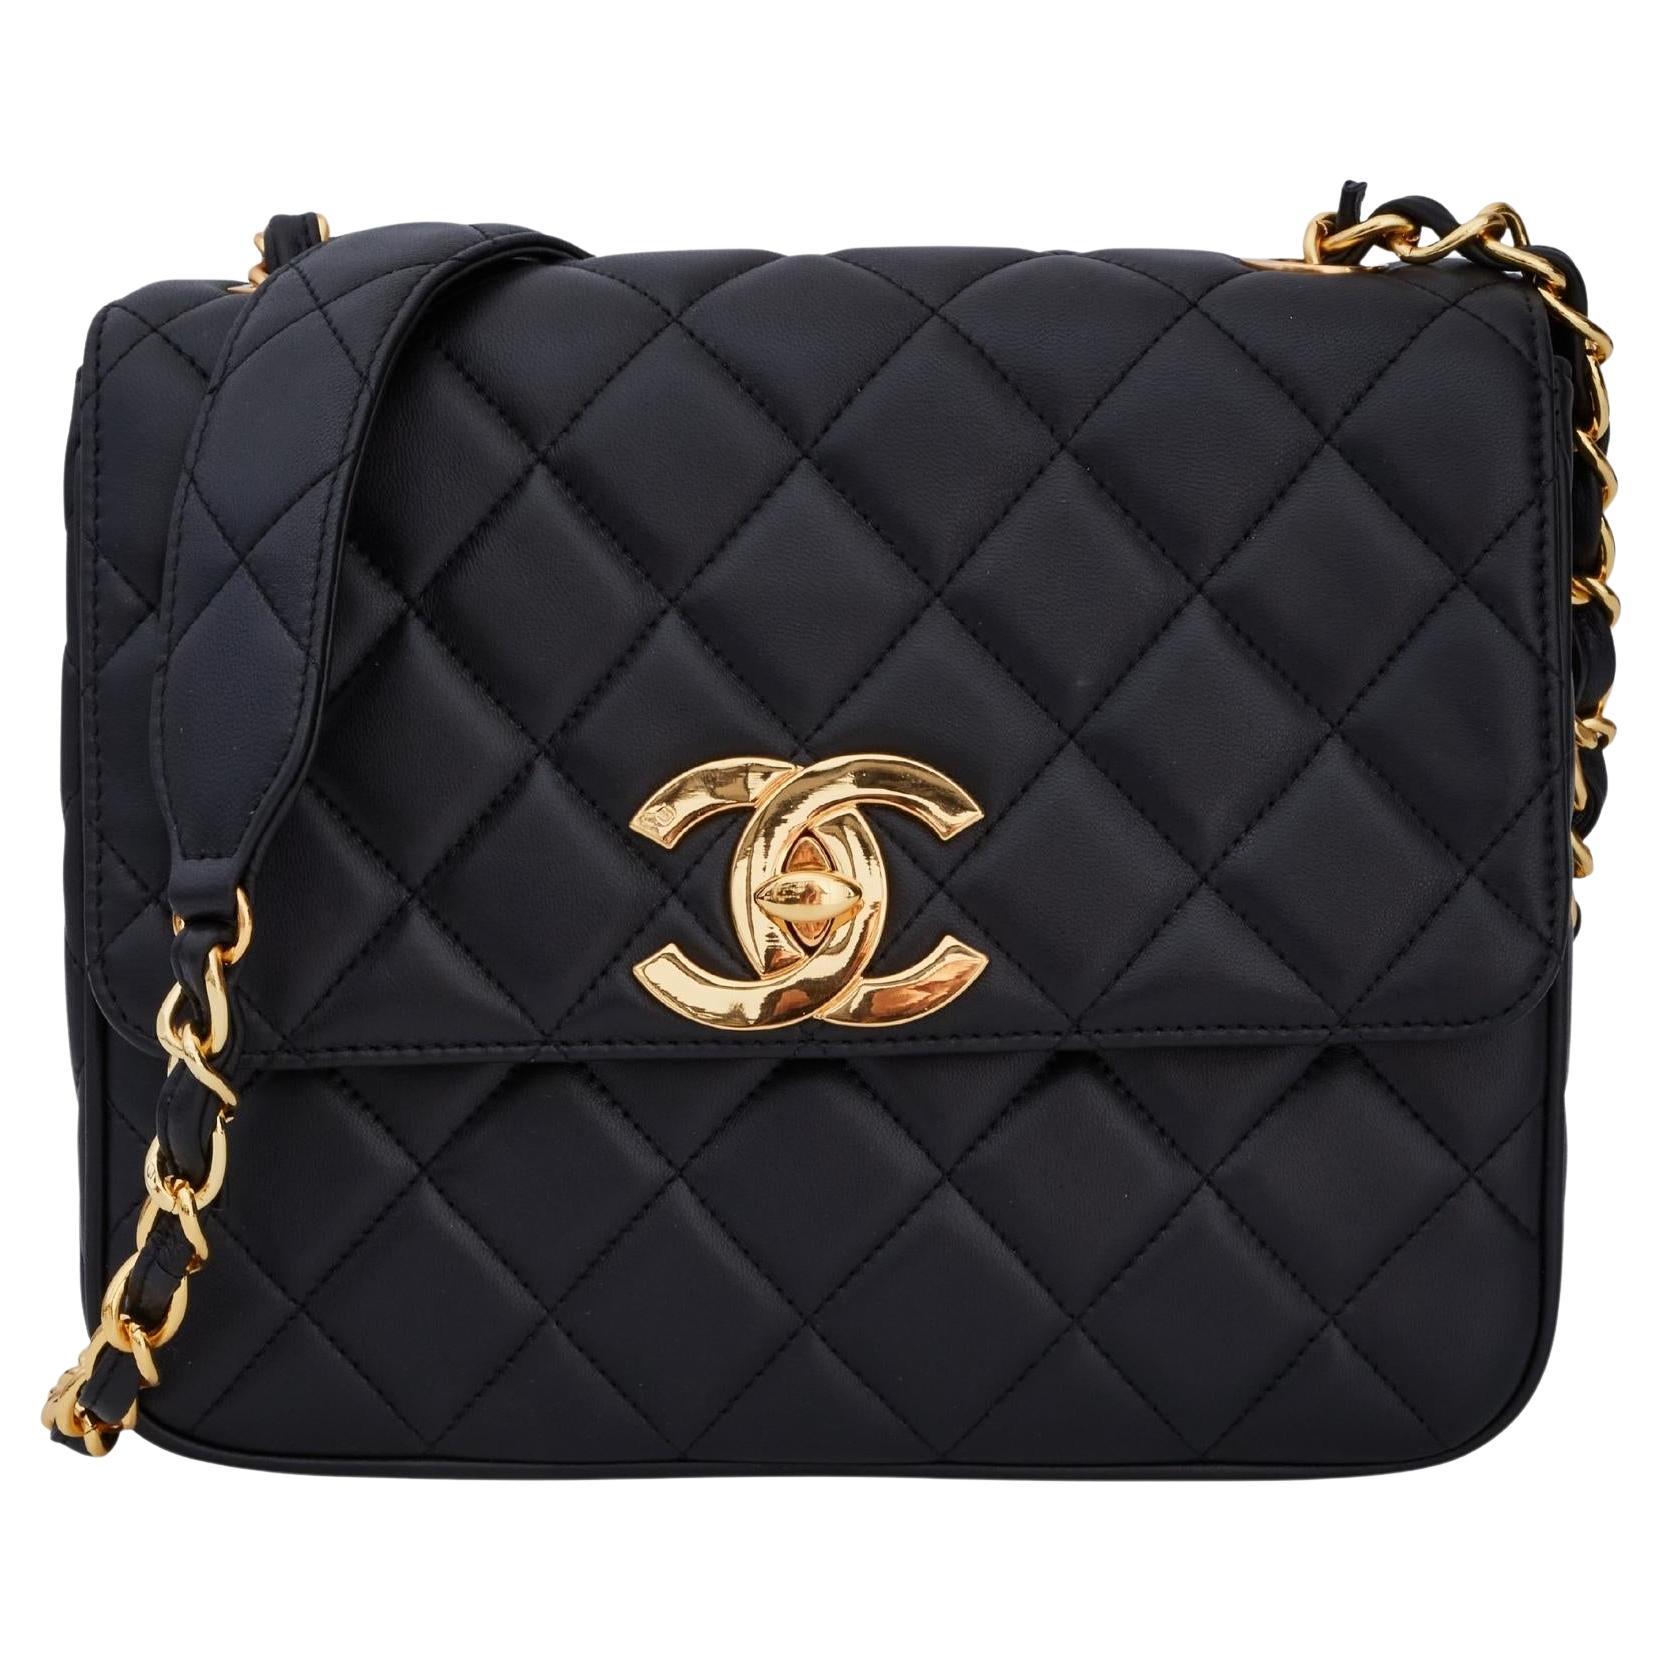 Chanel Gold Lambskin and Black Patent Leather Double Circle Clutch Gold Hardware, 2007 (Very Good), Womens Handbag